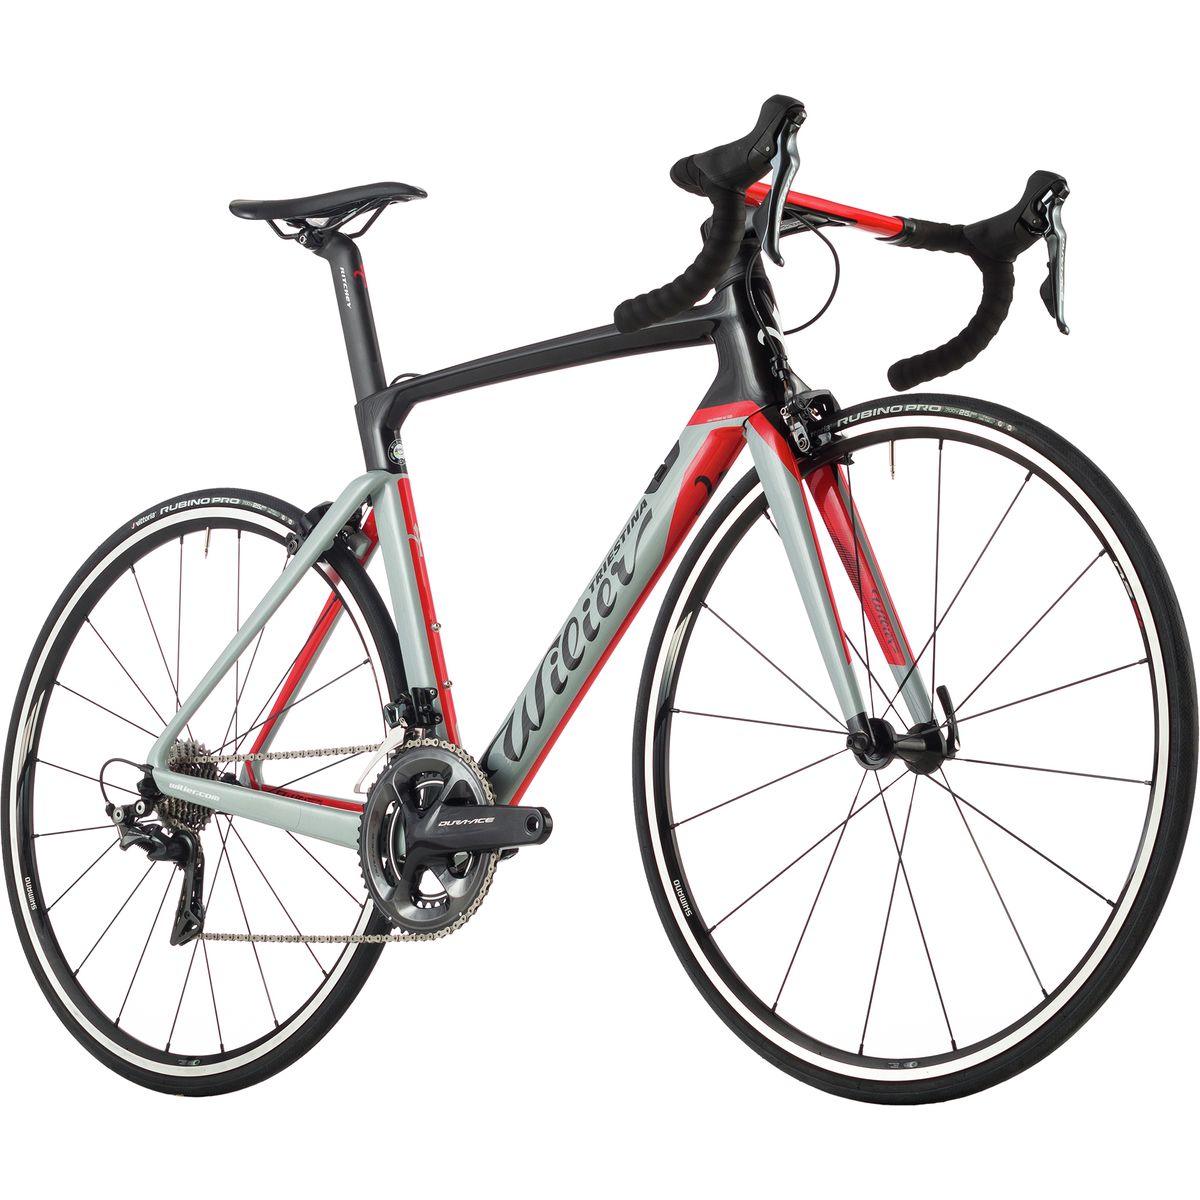 Wilier Cento10 Air Dura-Ace 9100 Complete Road Bike - 2017